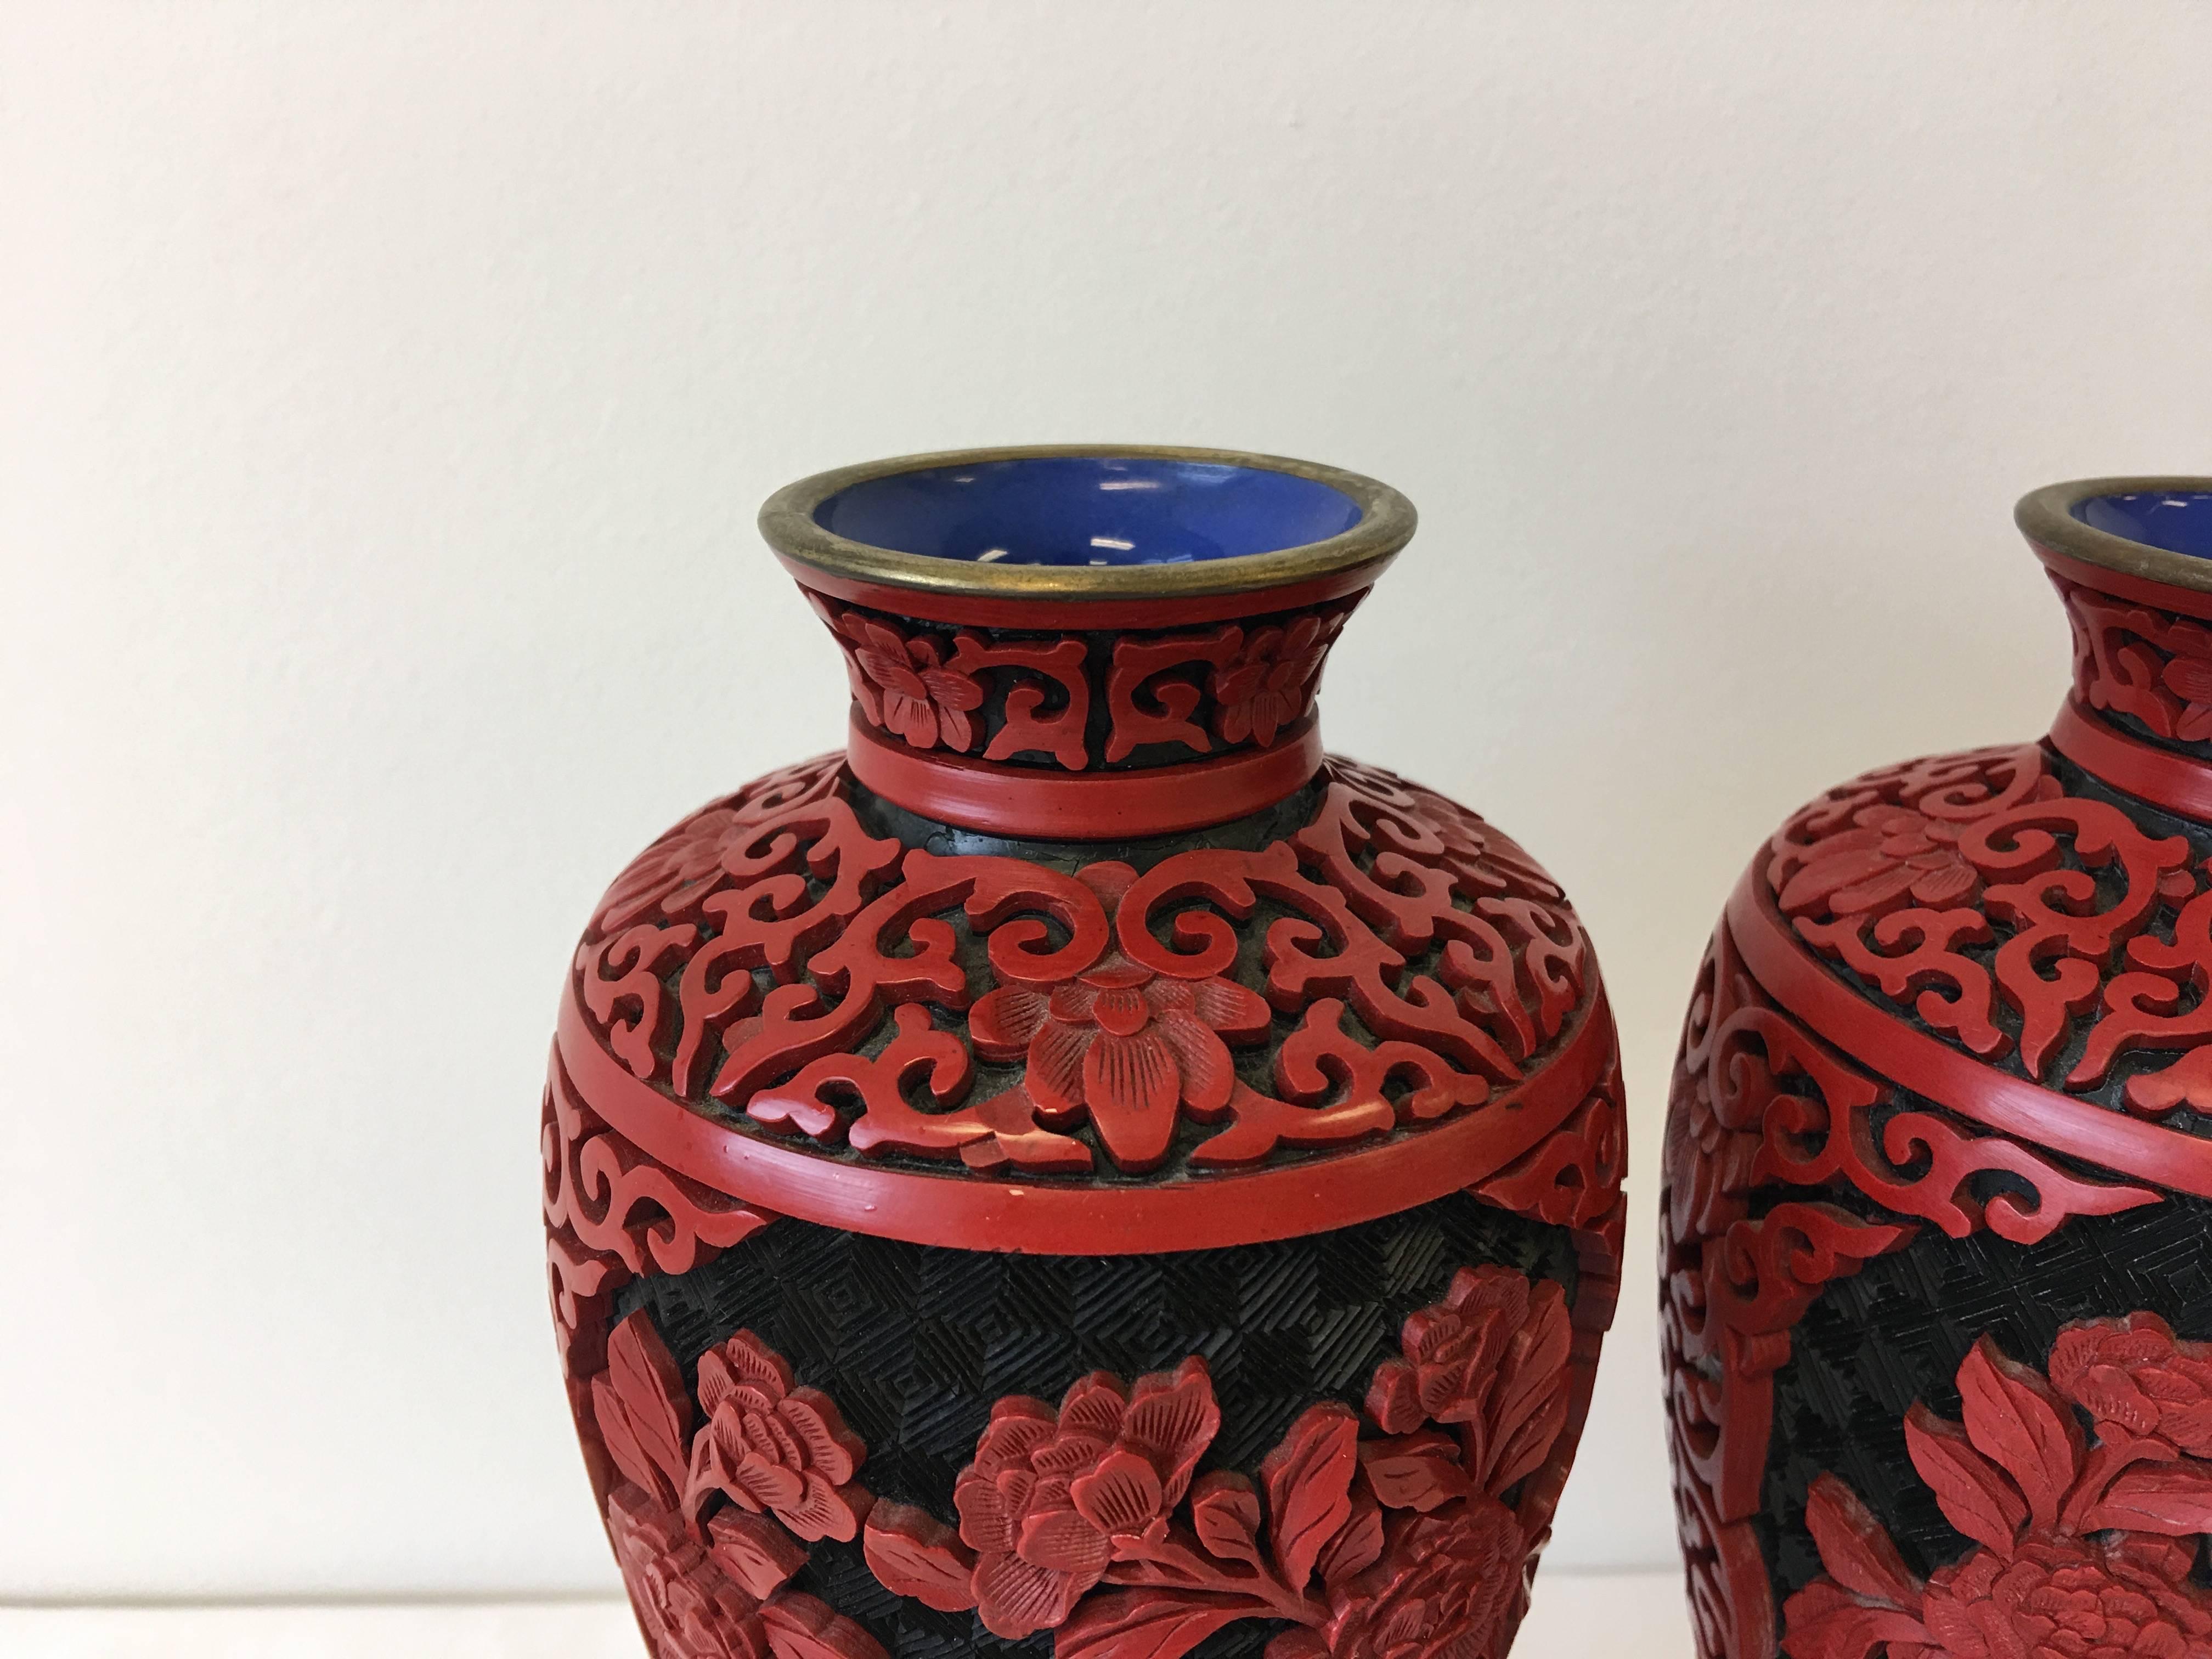 Offered is an elegant pair of 19th century, red Chinese cinnabar cloisonné vases on ornate wood stands.